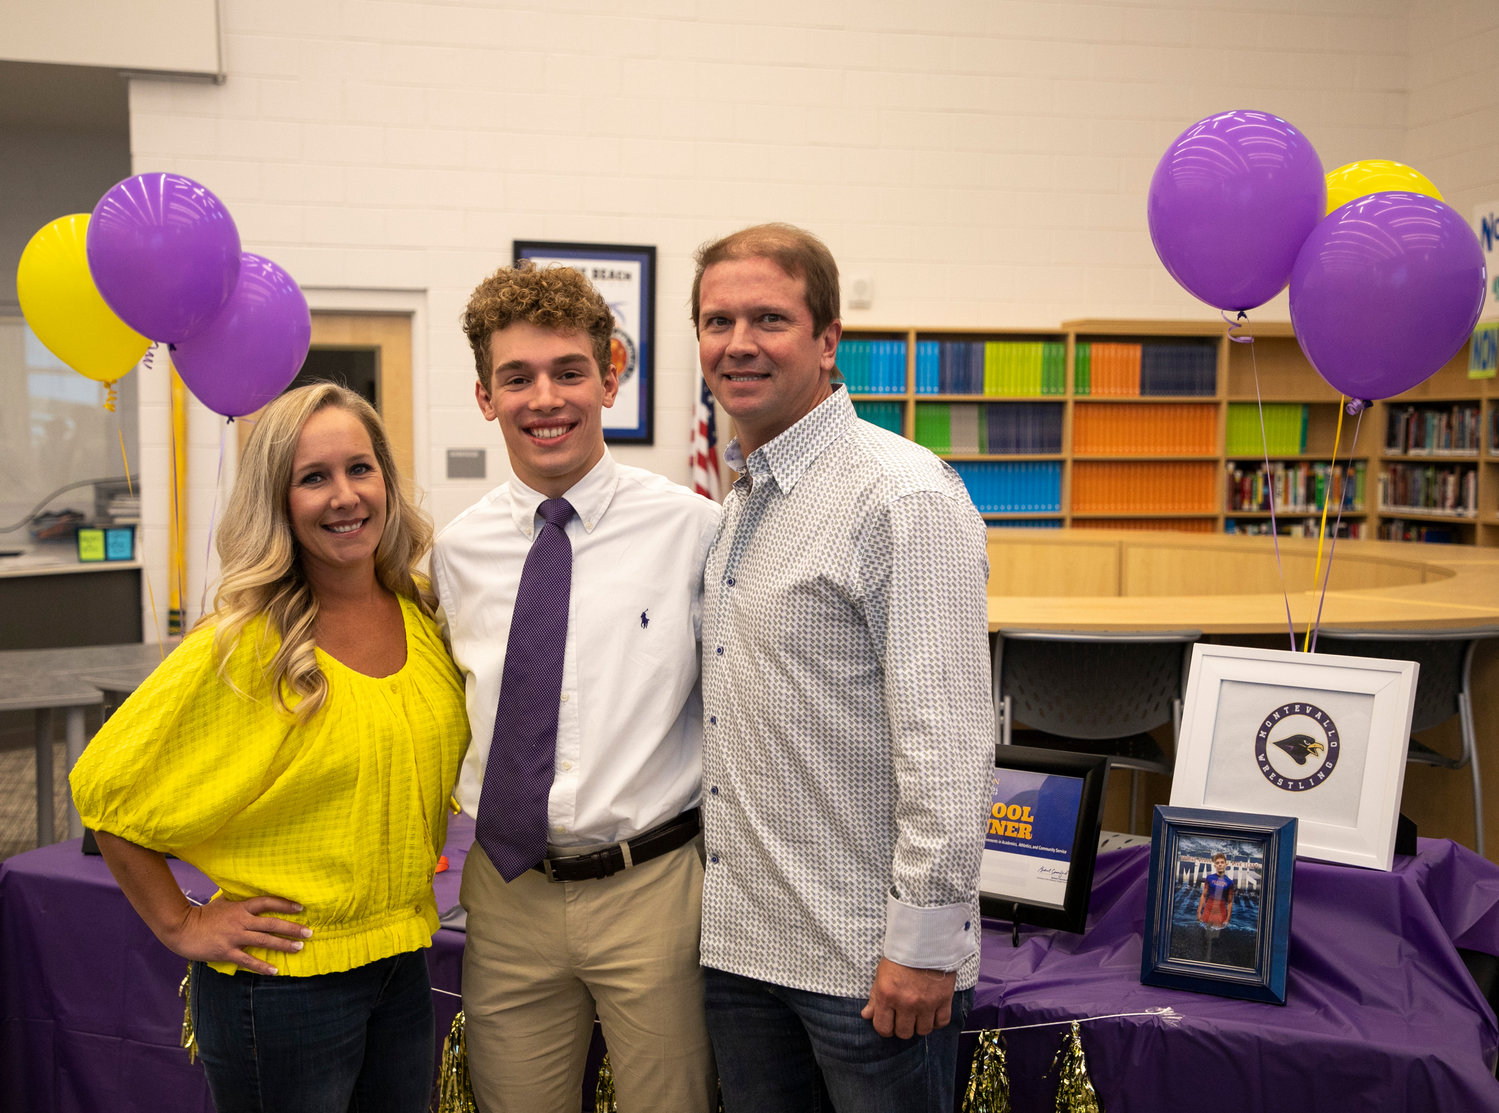 Shayd Arboneaux and his parents celebrated the wrestler’s signing with the University of Montevallo wrestling team in the Orange Beach High School Media Center Monday, Nov. 14, as part of the first wave of National Signing Day.